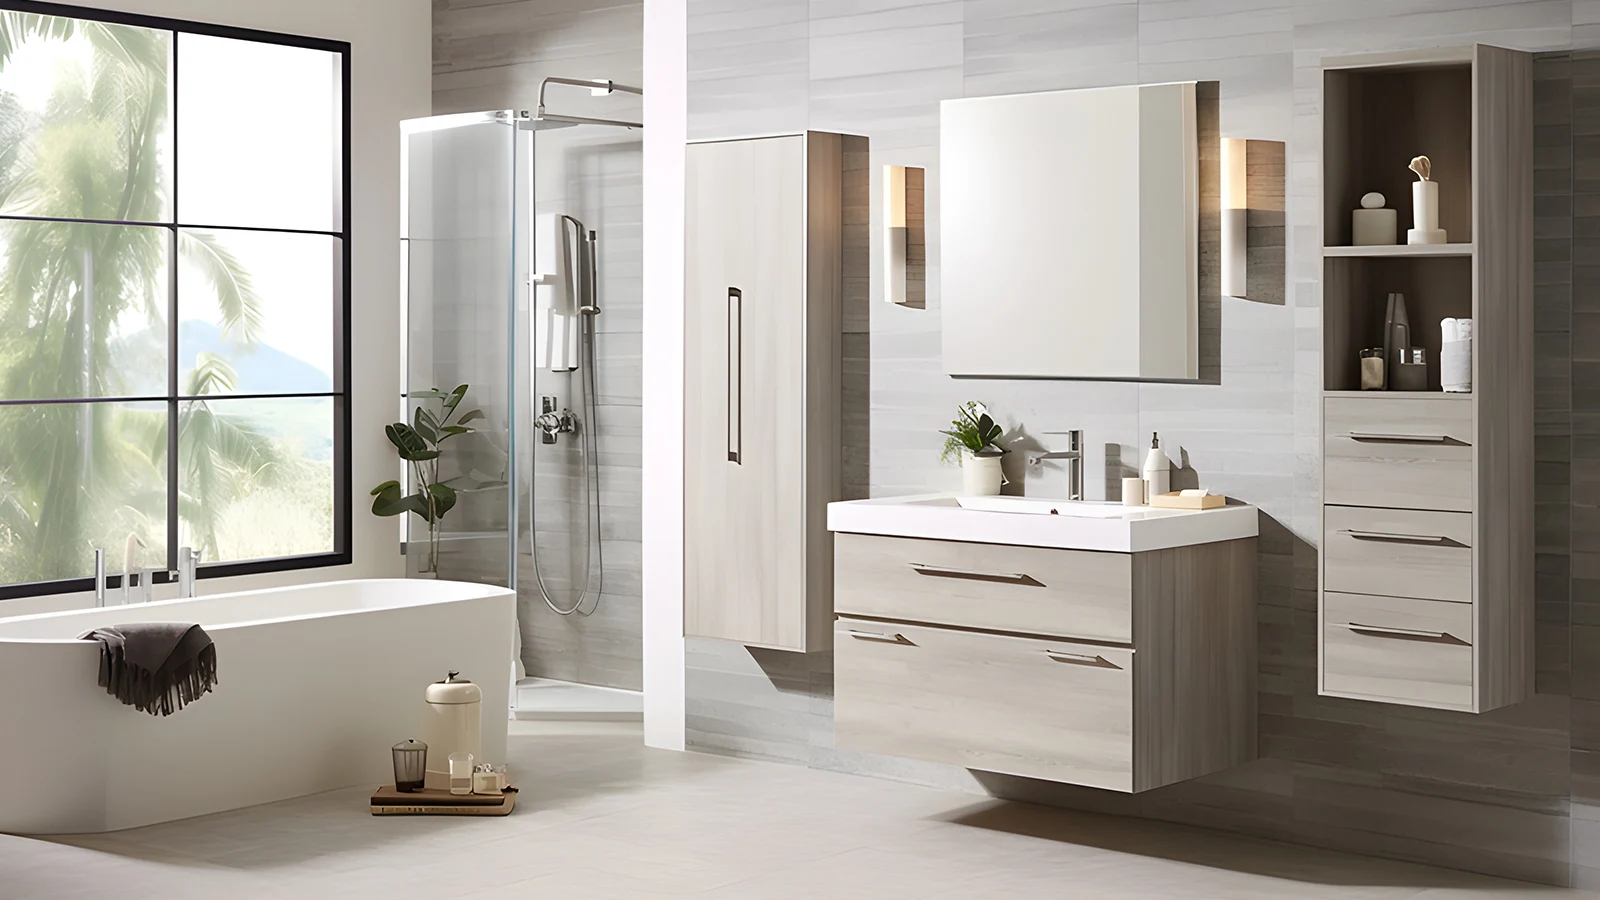 A modern bathroom with a bathtub and sink is a stylish addition to any apartment.